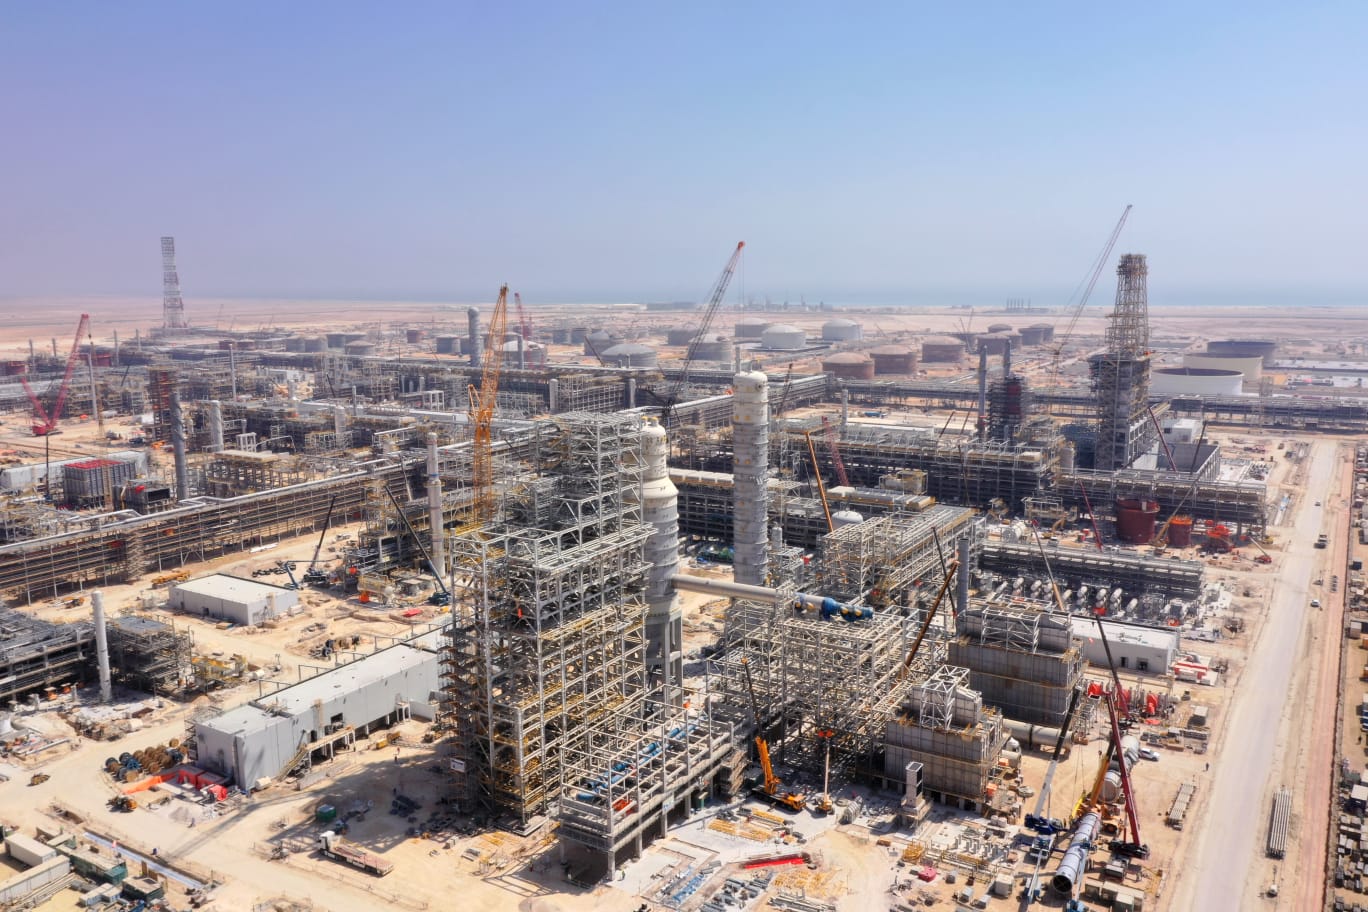 Duqm Refinery begins trial operation to increase oil refining capabilities in the Sultanate of Oman (photos)